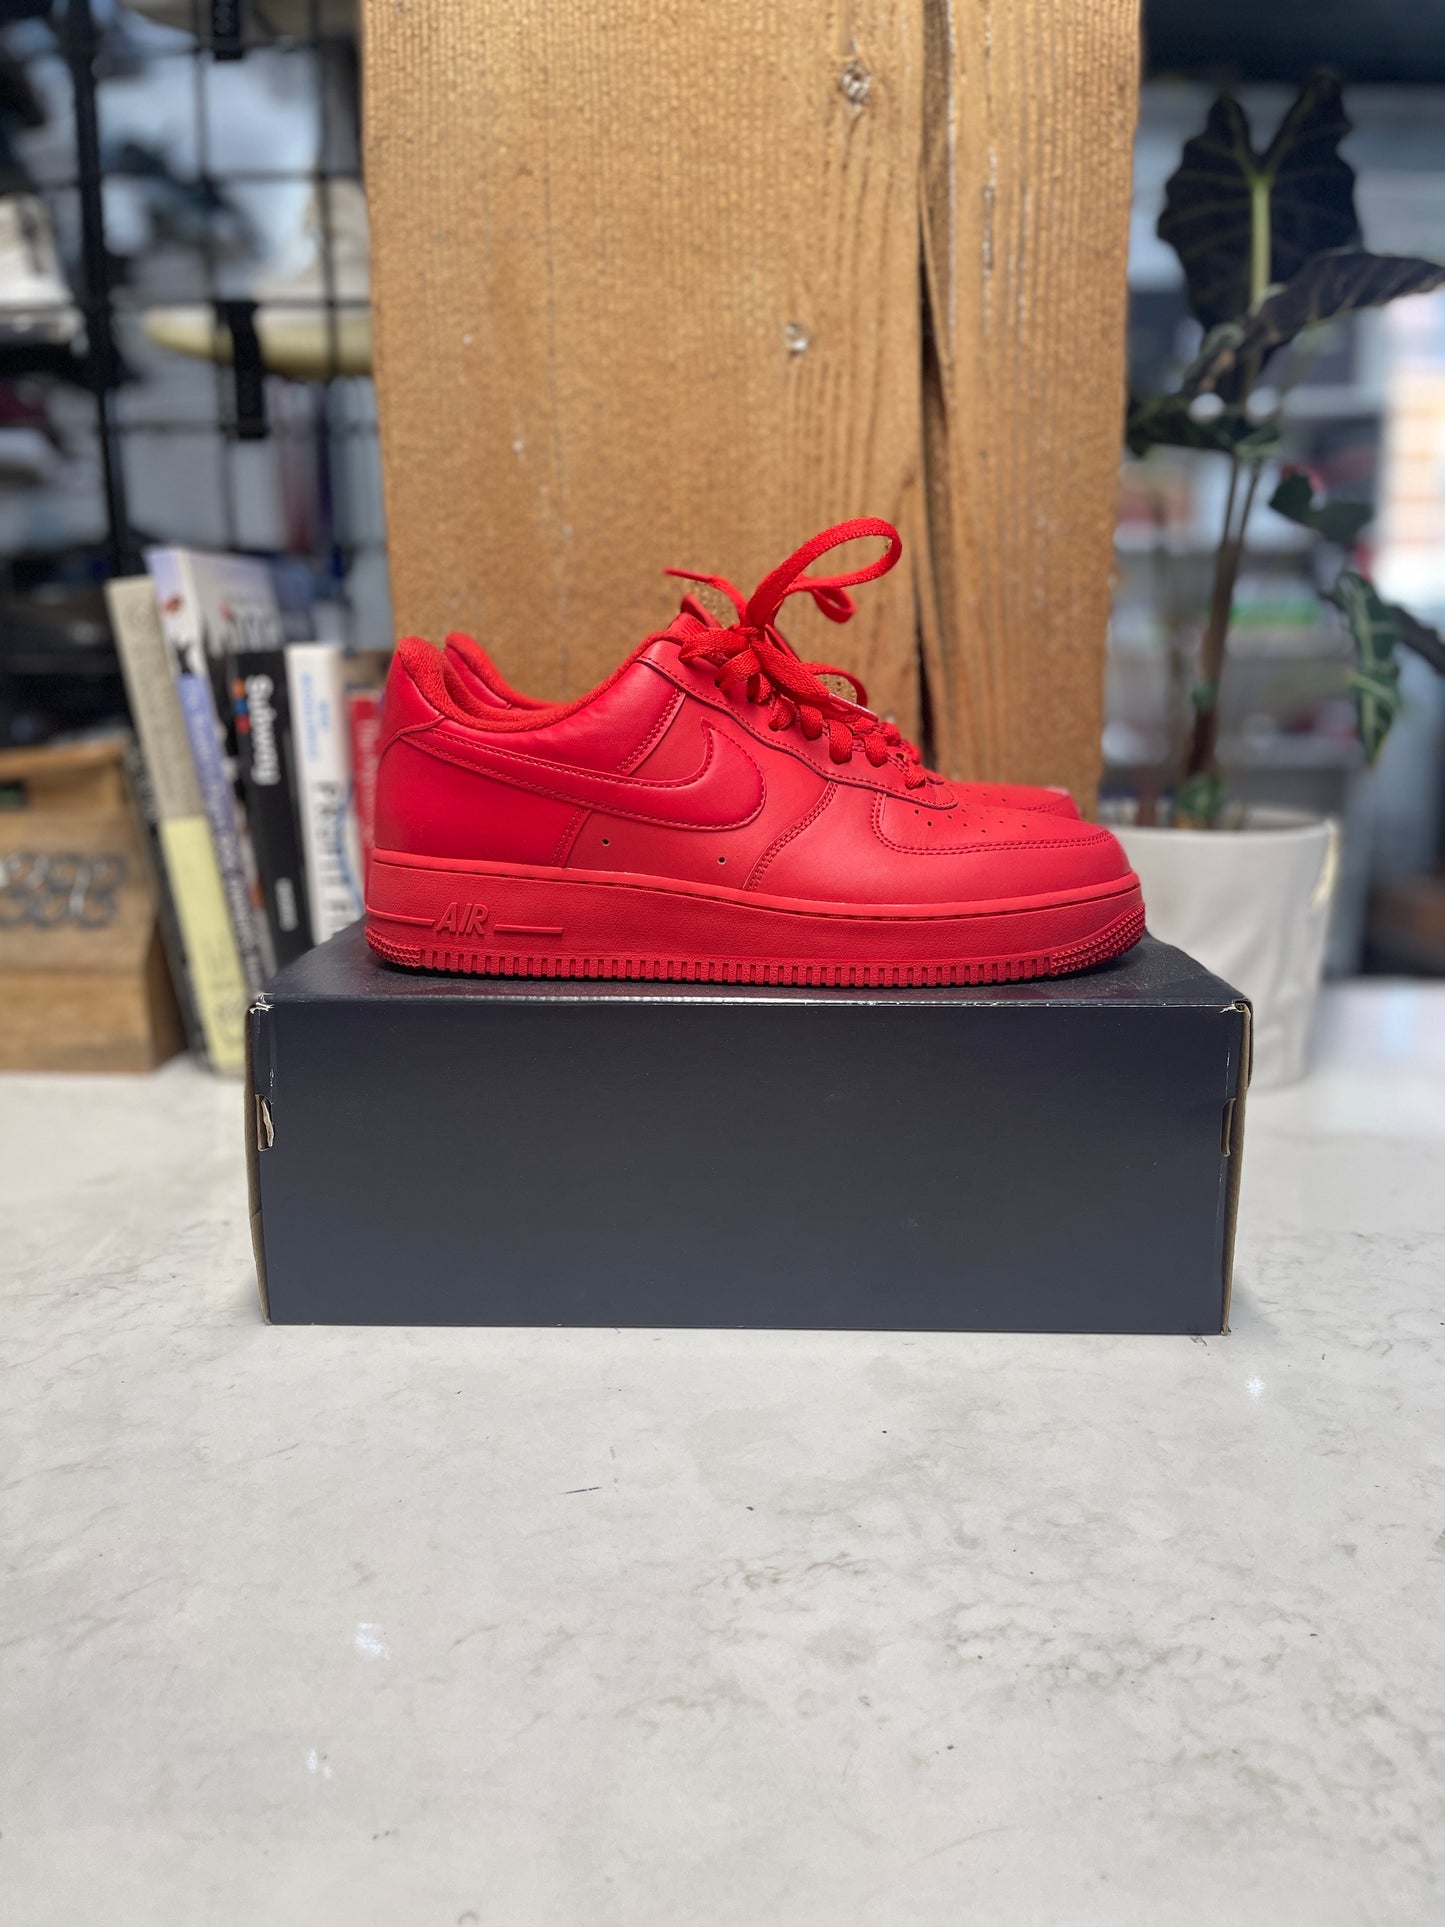 Nike Red Air Force 1 Low (Size 9.5)